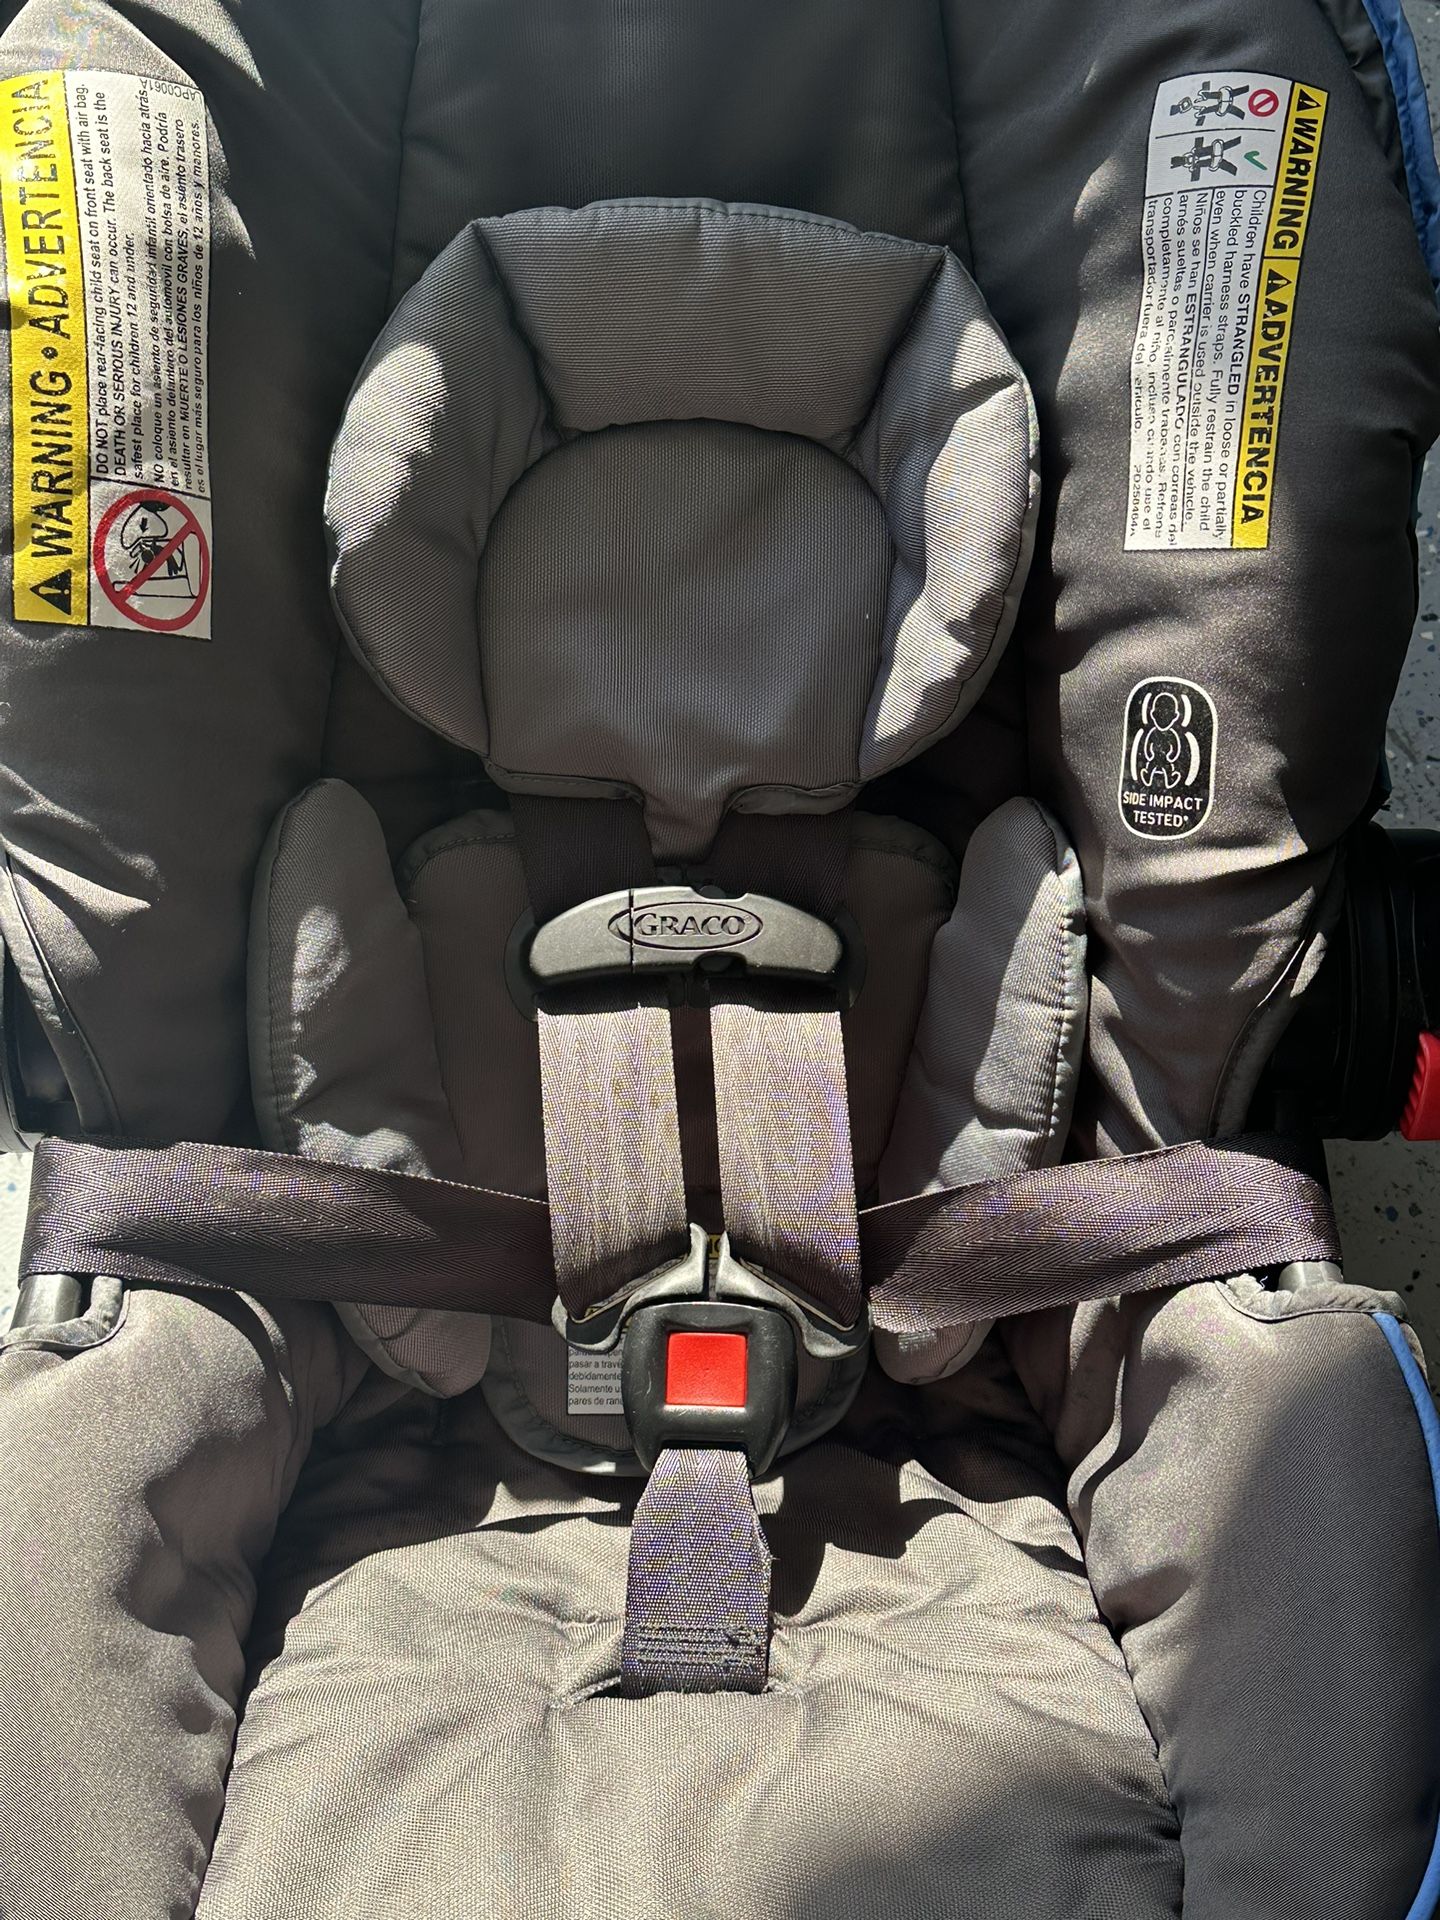 Graco SNUGRIDE SNUGLOCK 30 INFANT BABY CAR SEAT CLICK CONNECT WITH BASE